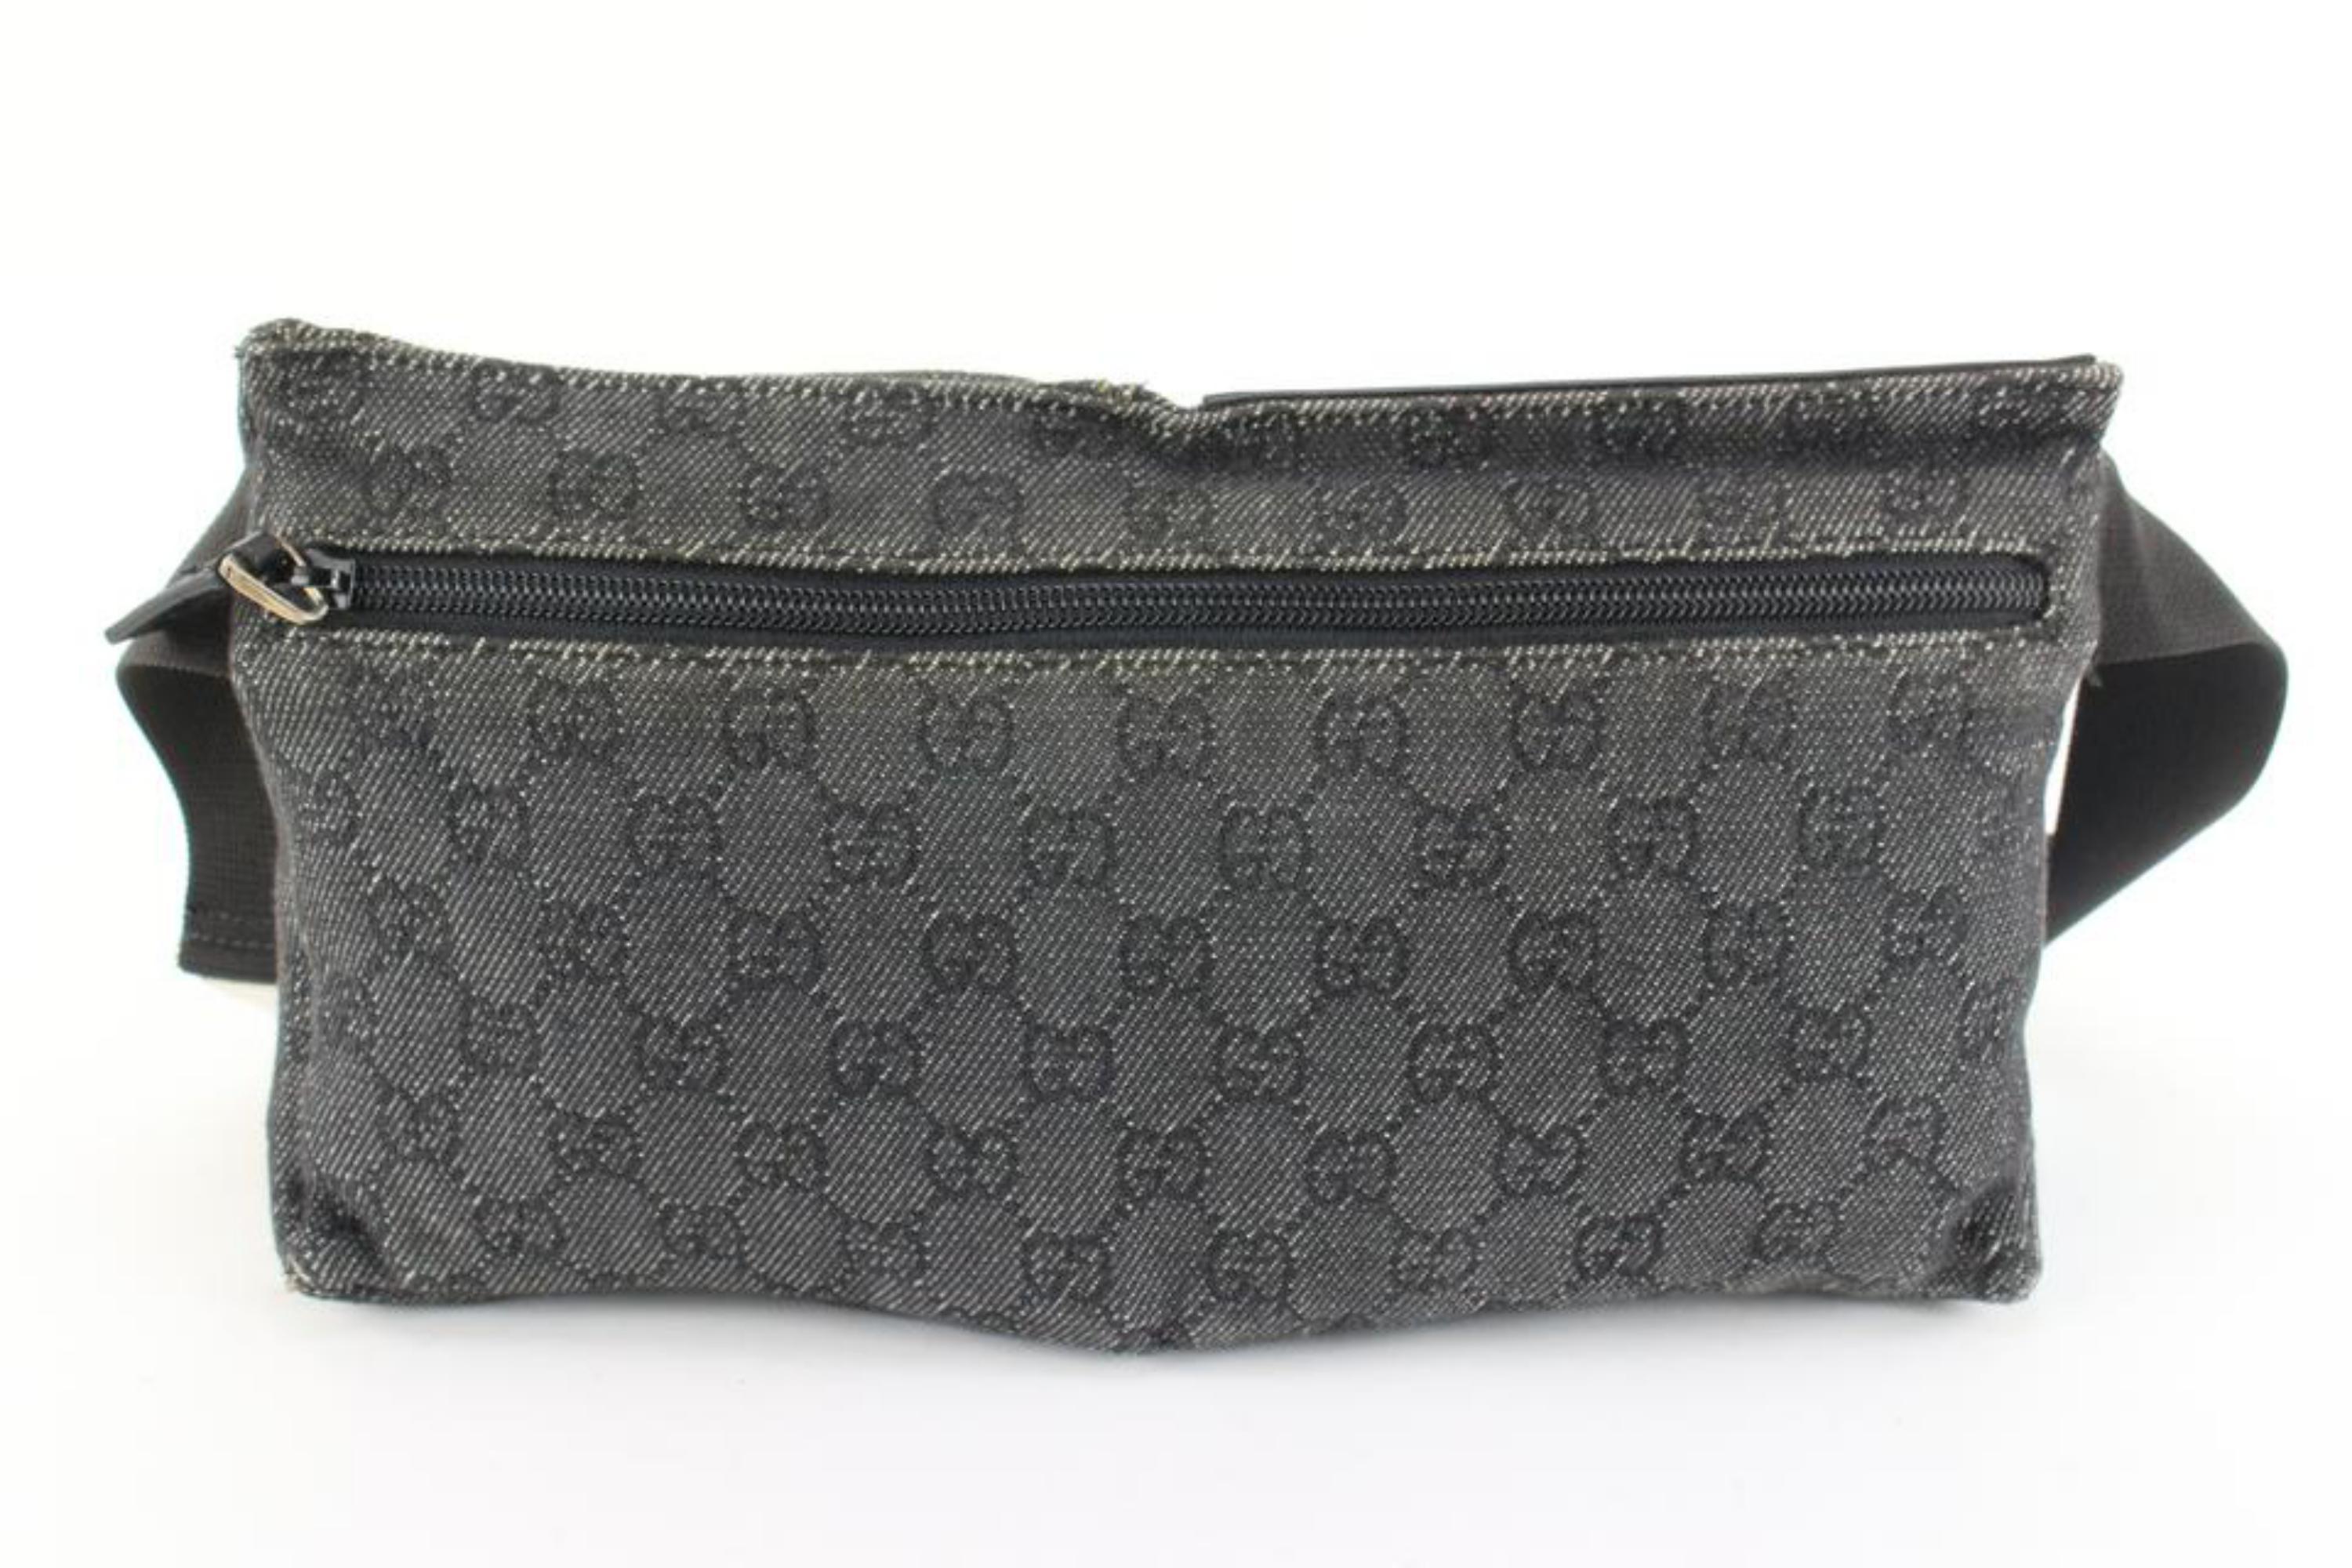 Gucci Charcoal Denim Monogram GG Belt Bag Waist Bag Fanny Pack 36g83s In Good Condition In Dix hills, NY